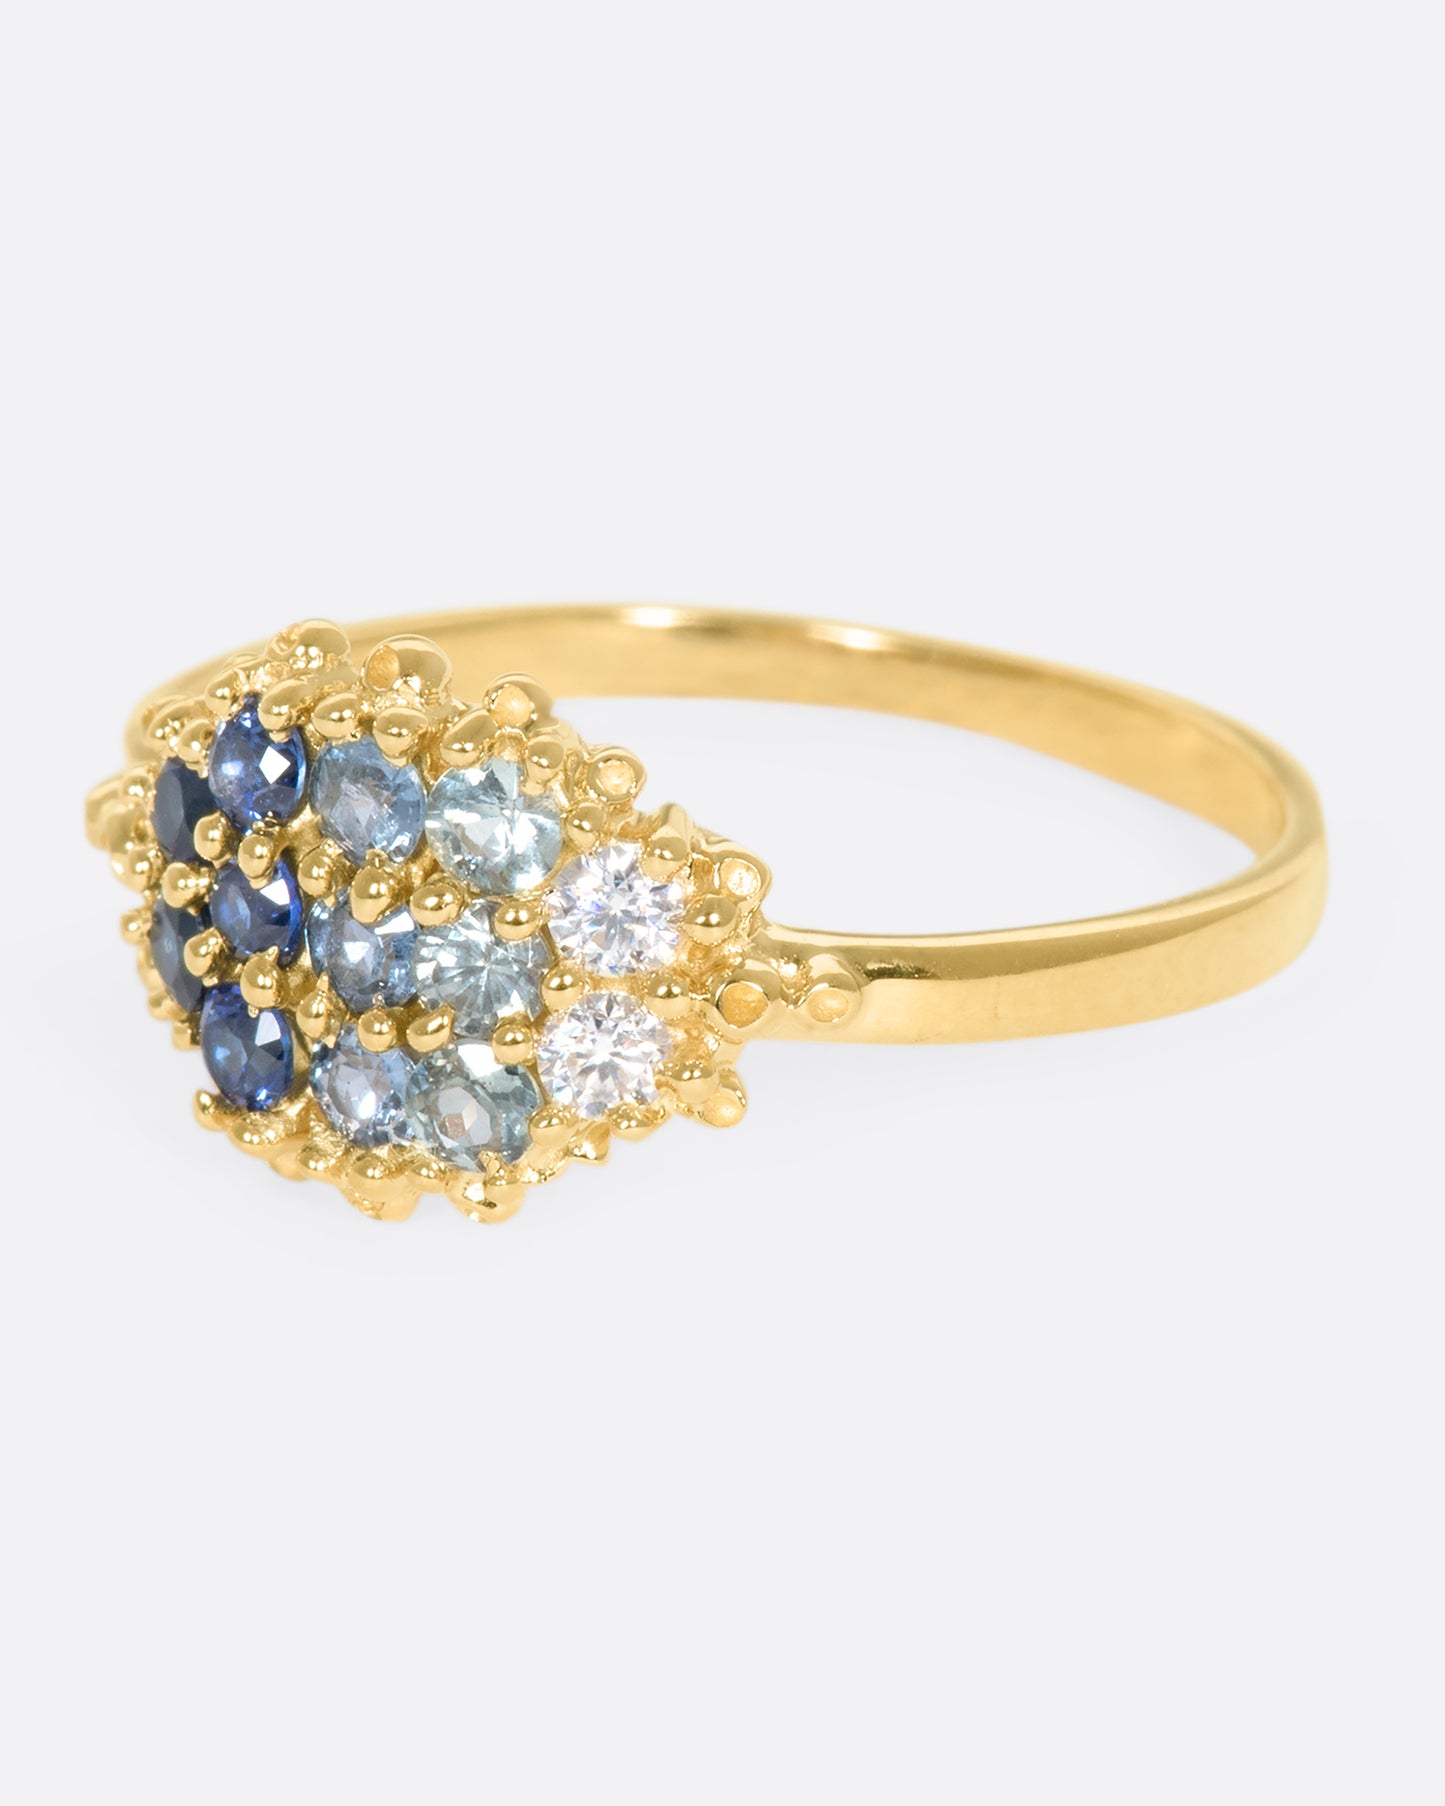 A left side view of a yellow gold ring with 12 sapphires in a range of blue shades.